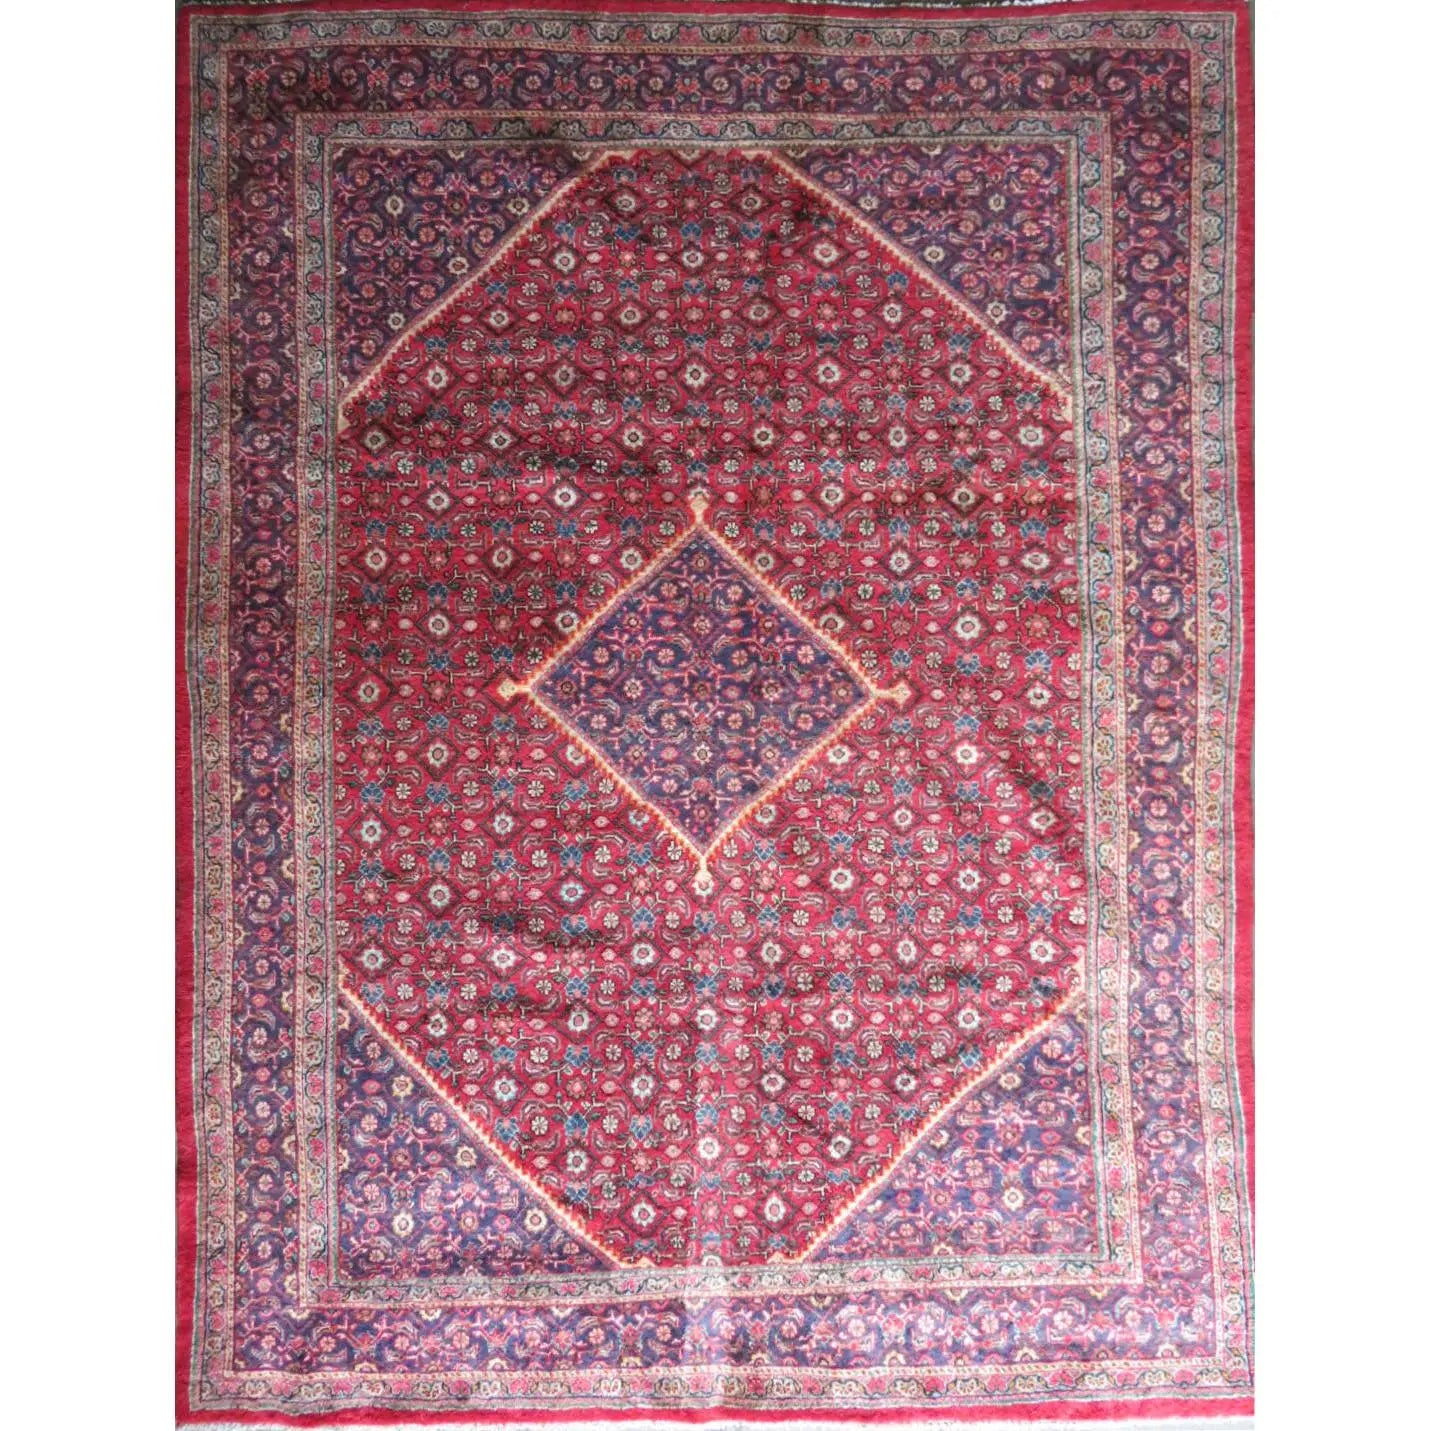 Hand-Knotted Persian Wool Rug – Luxurious Vintage Design, 13'1" x 10'0", Artisan Crafted